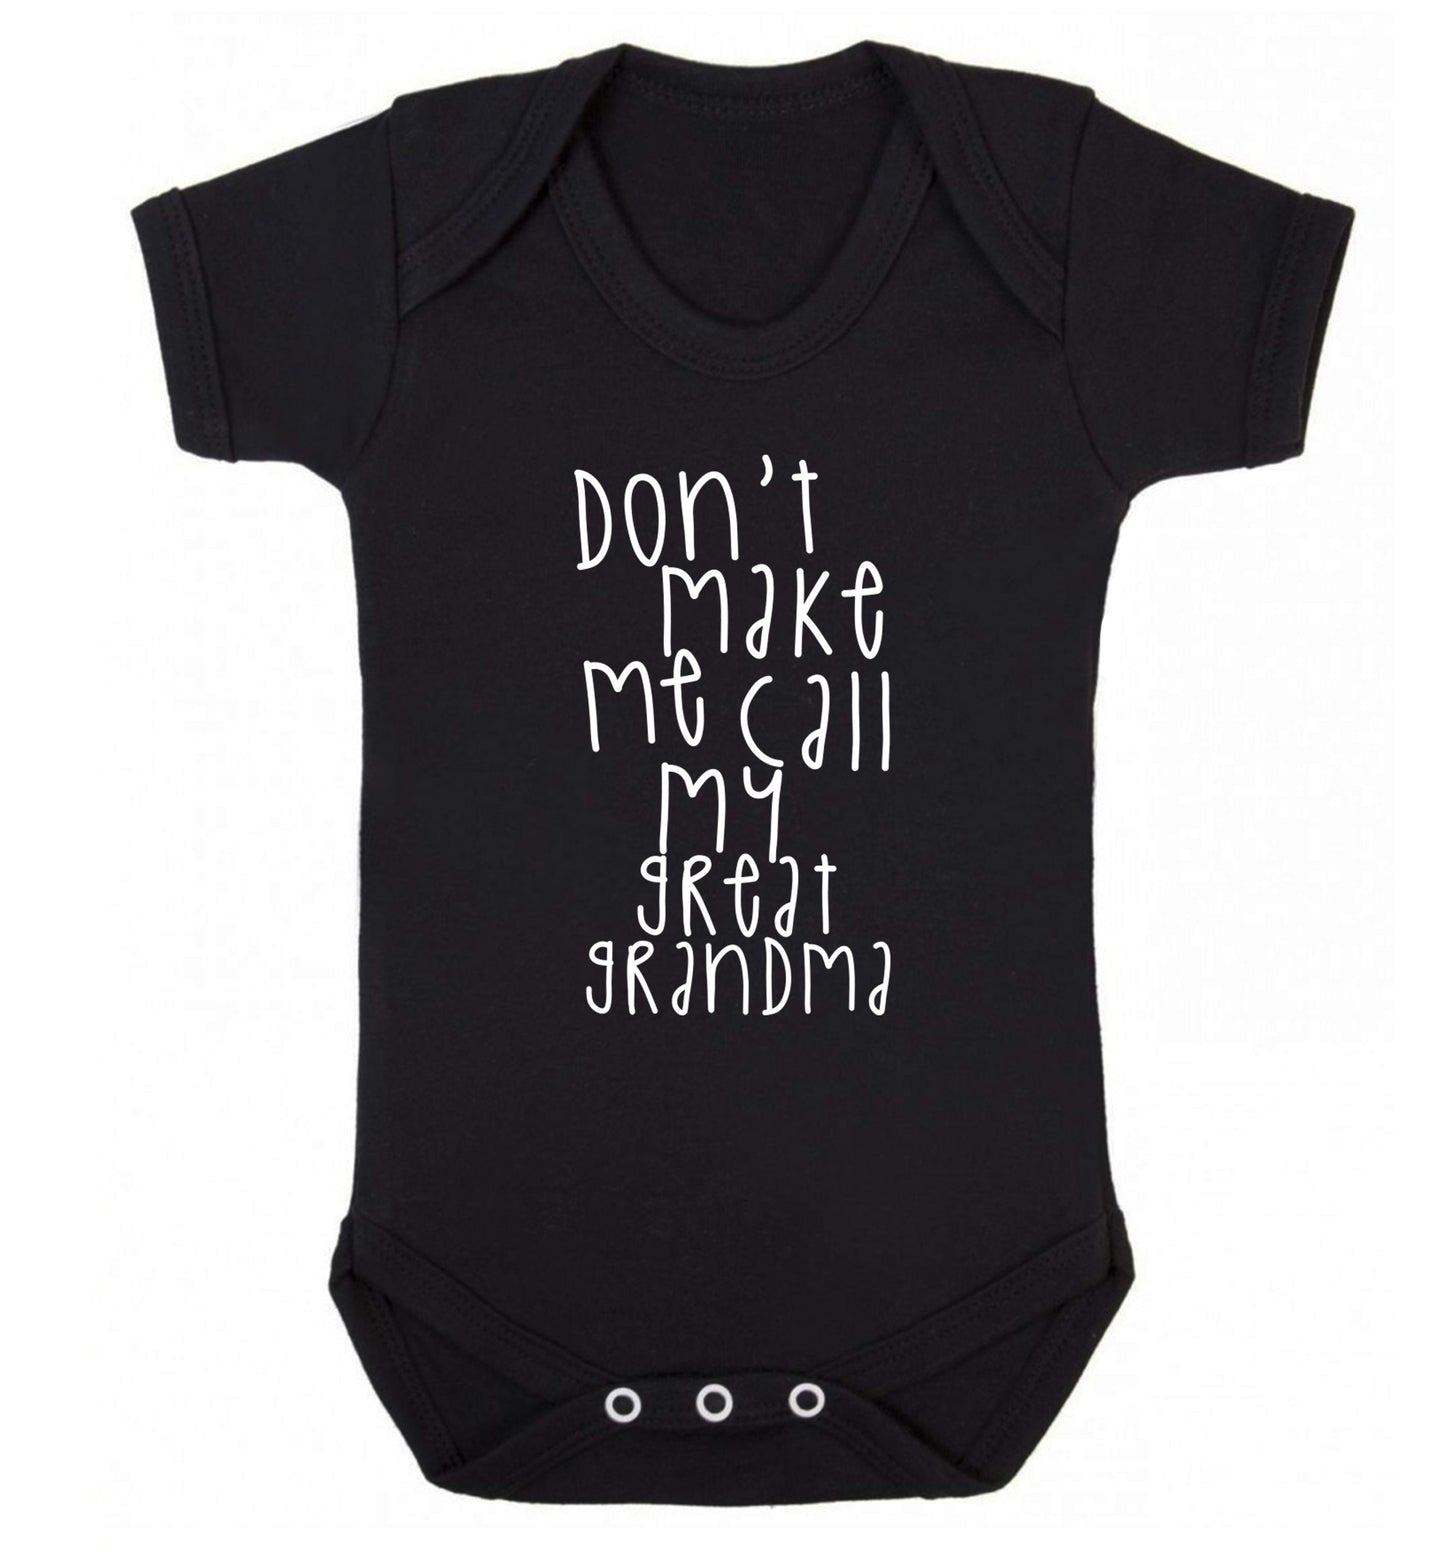 Don't make me call my great grandma Baby Vest black 18-24 months